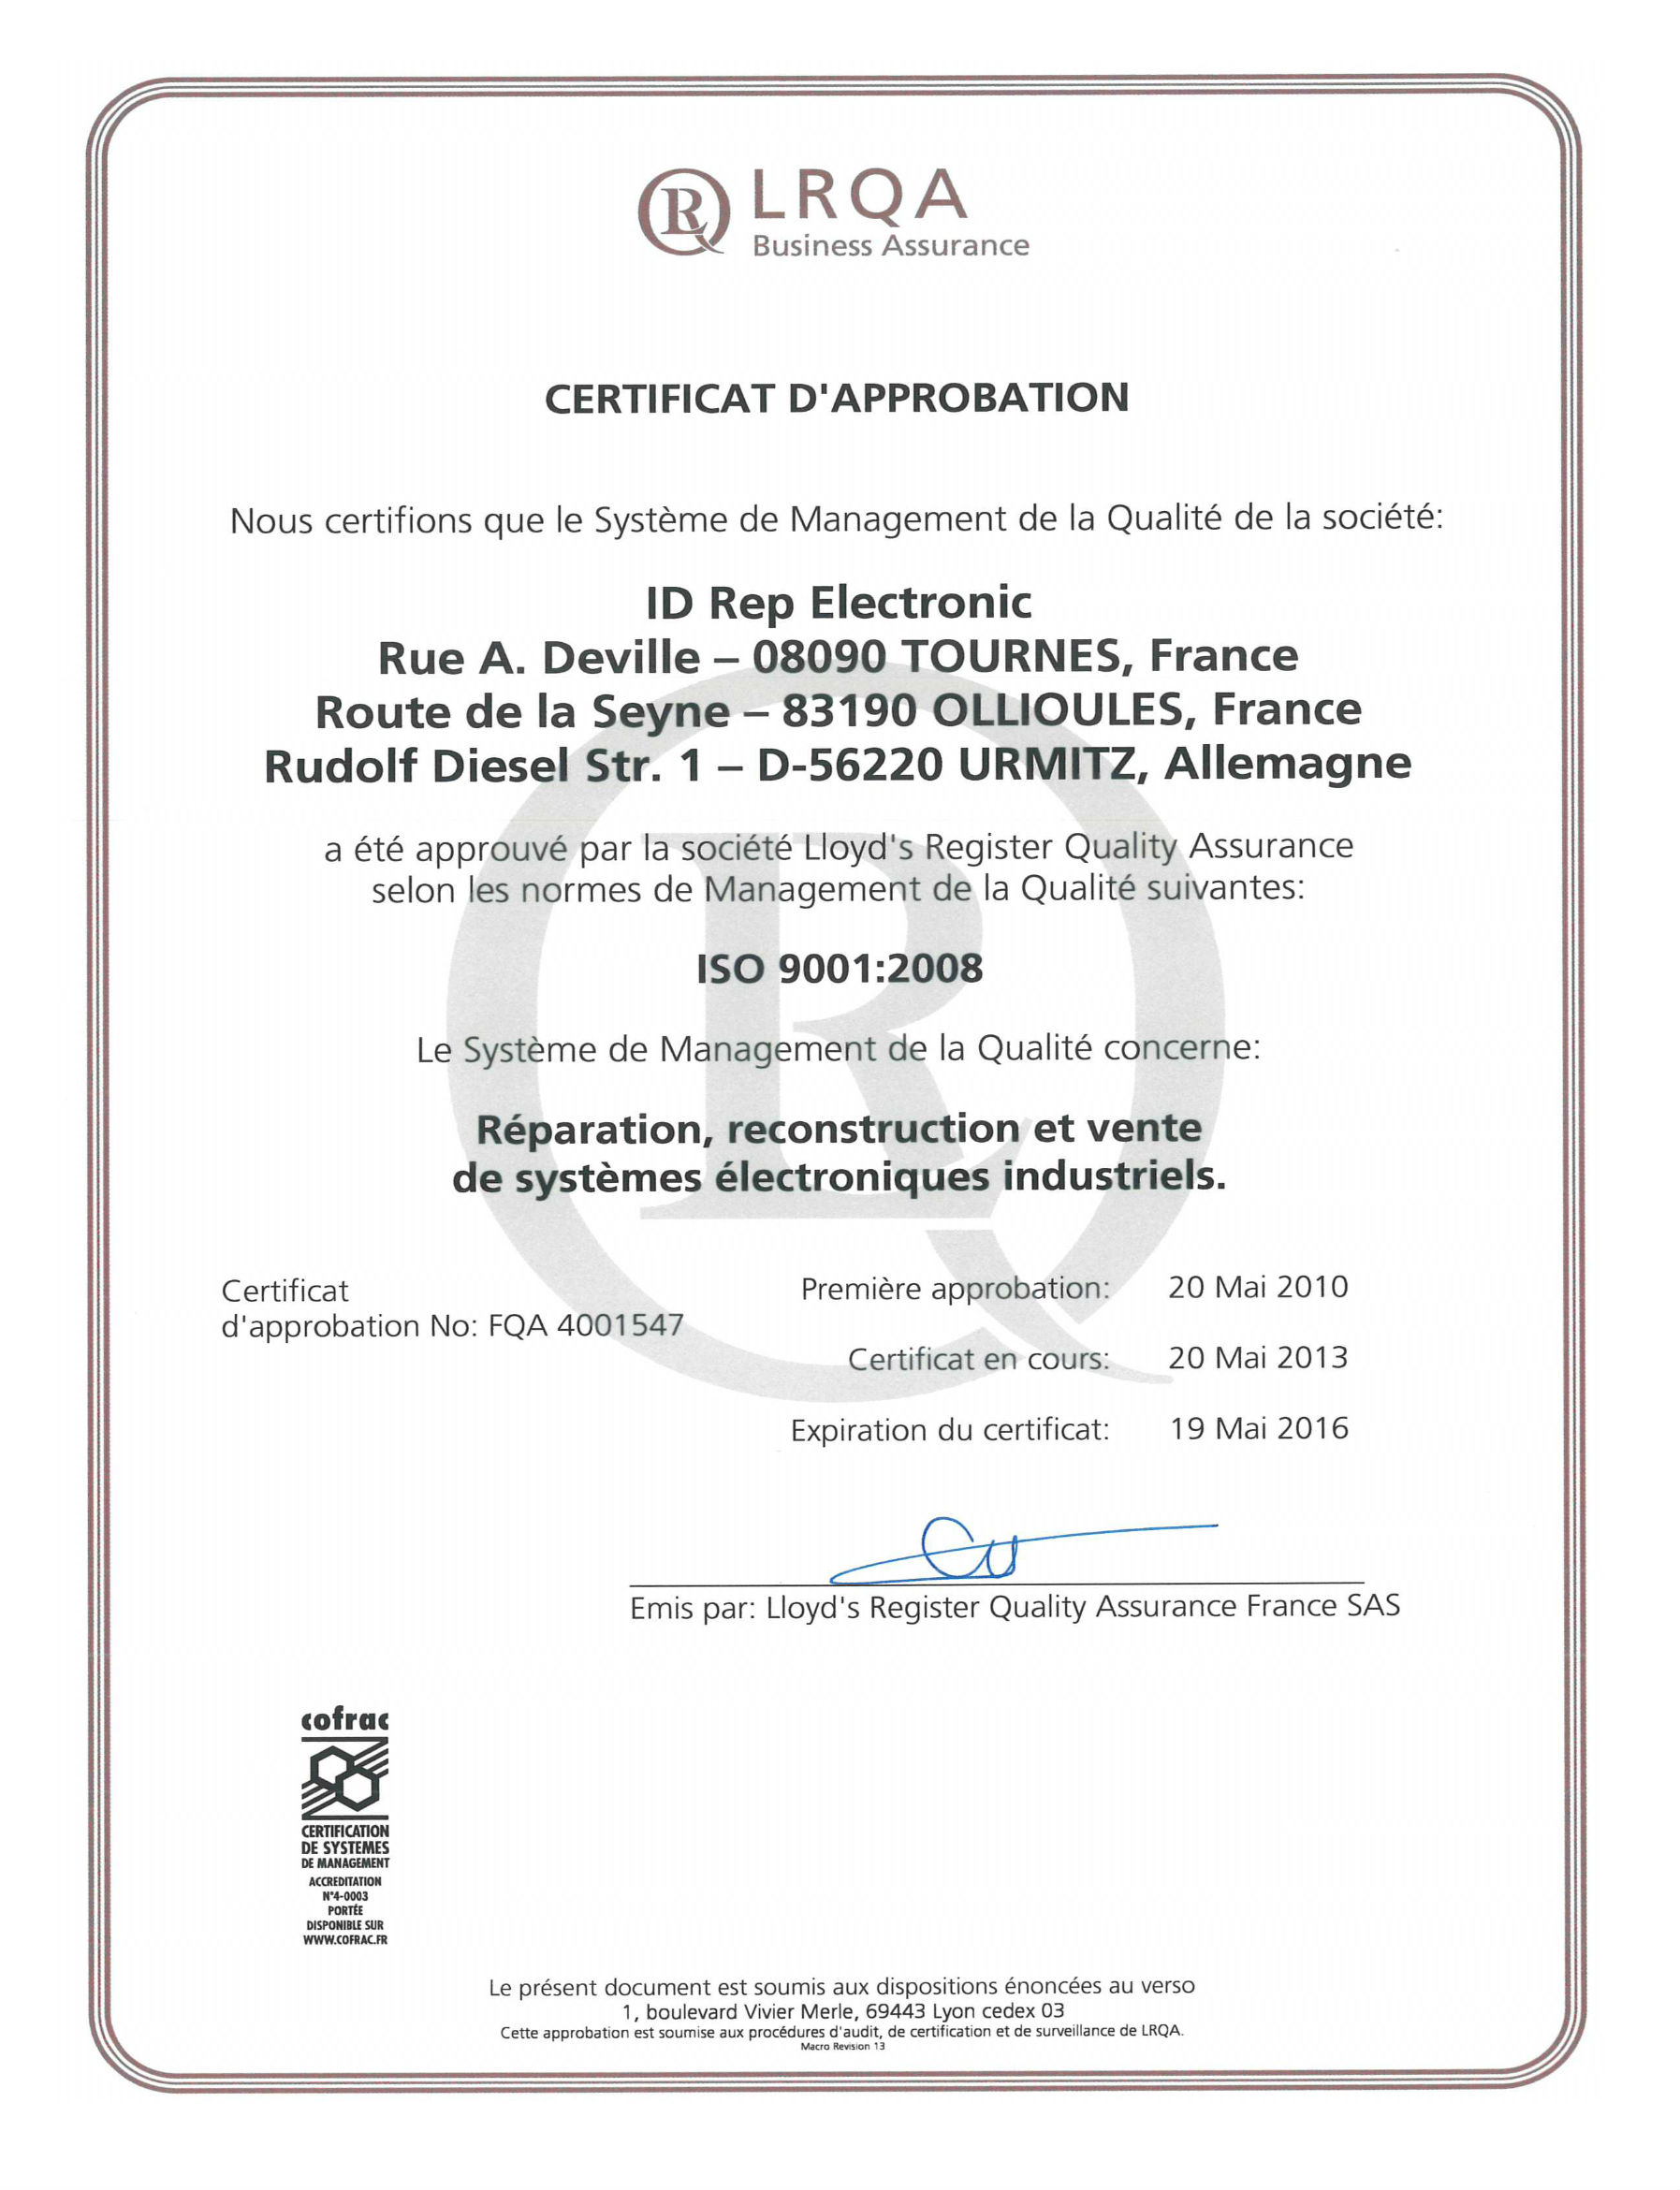 Certification ISO 9001 - 2008 ID Rep Electronic